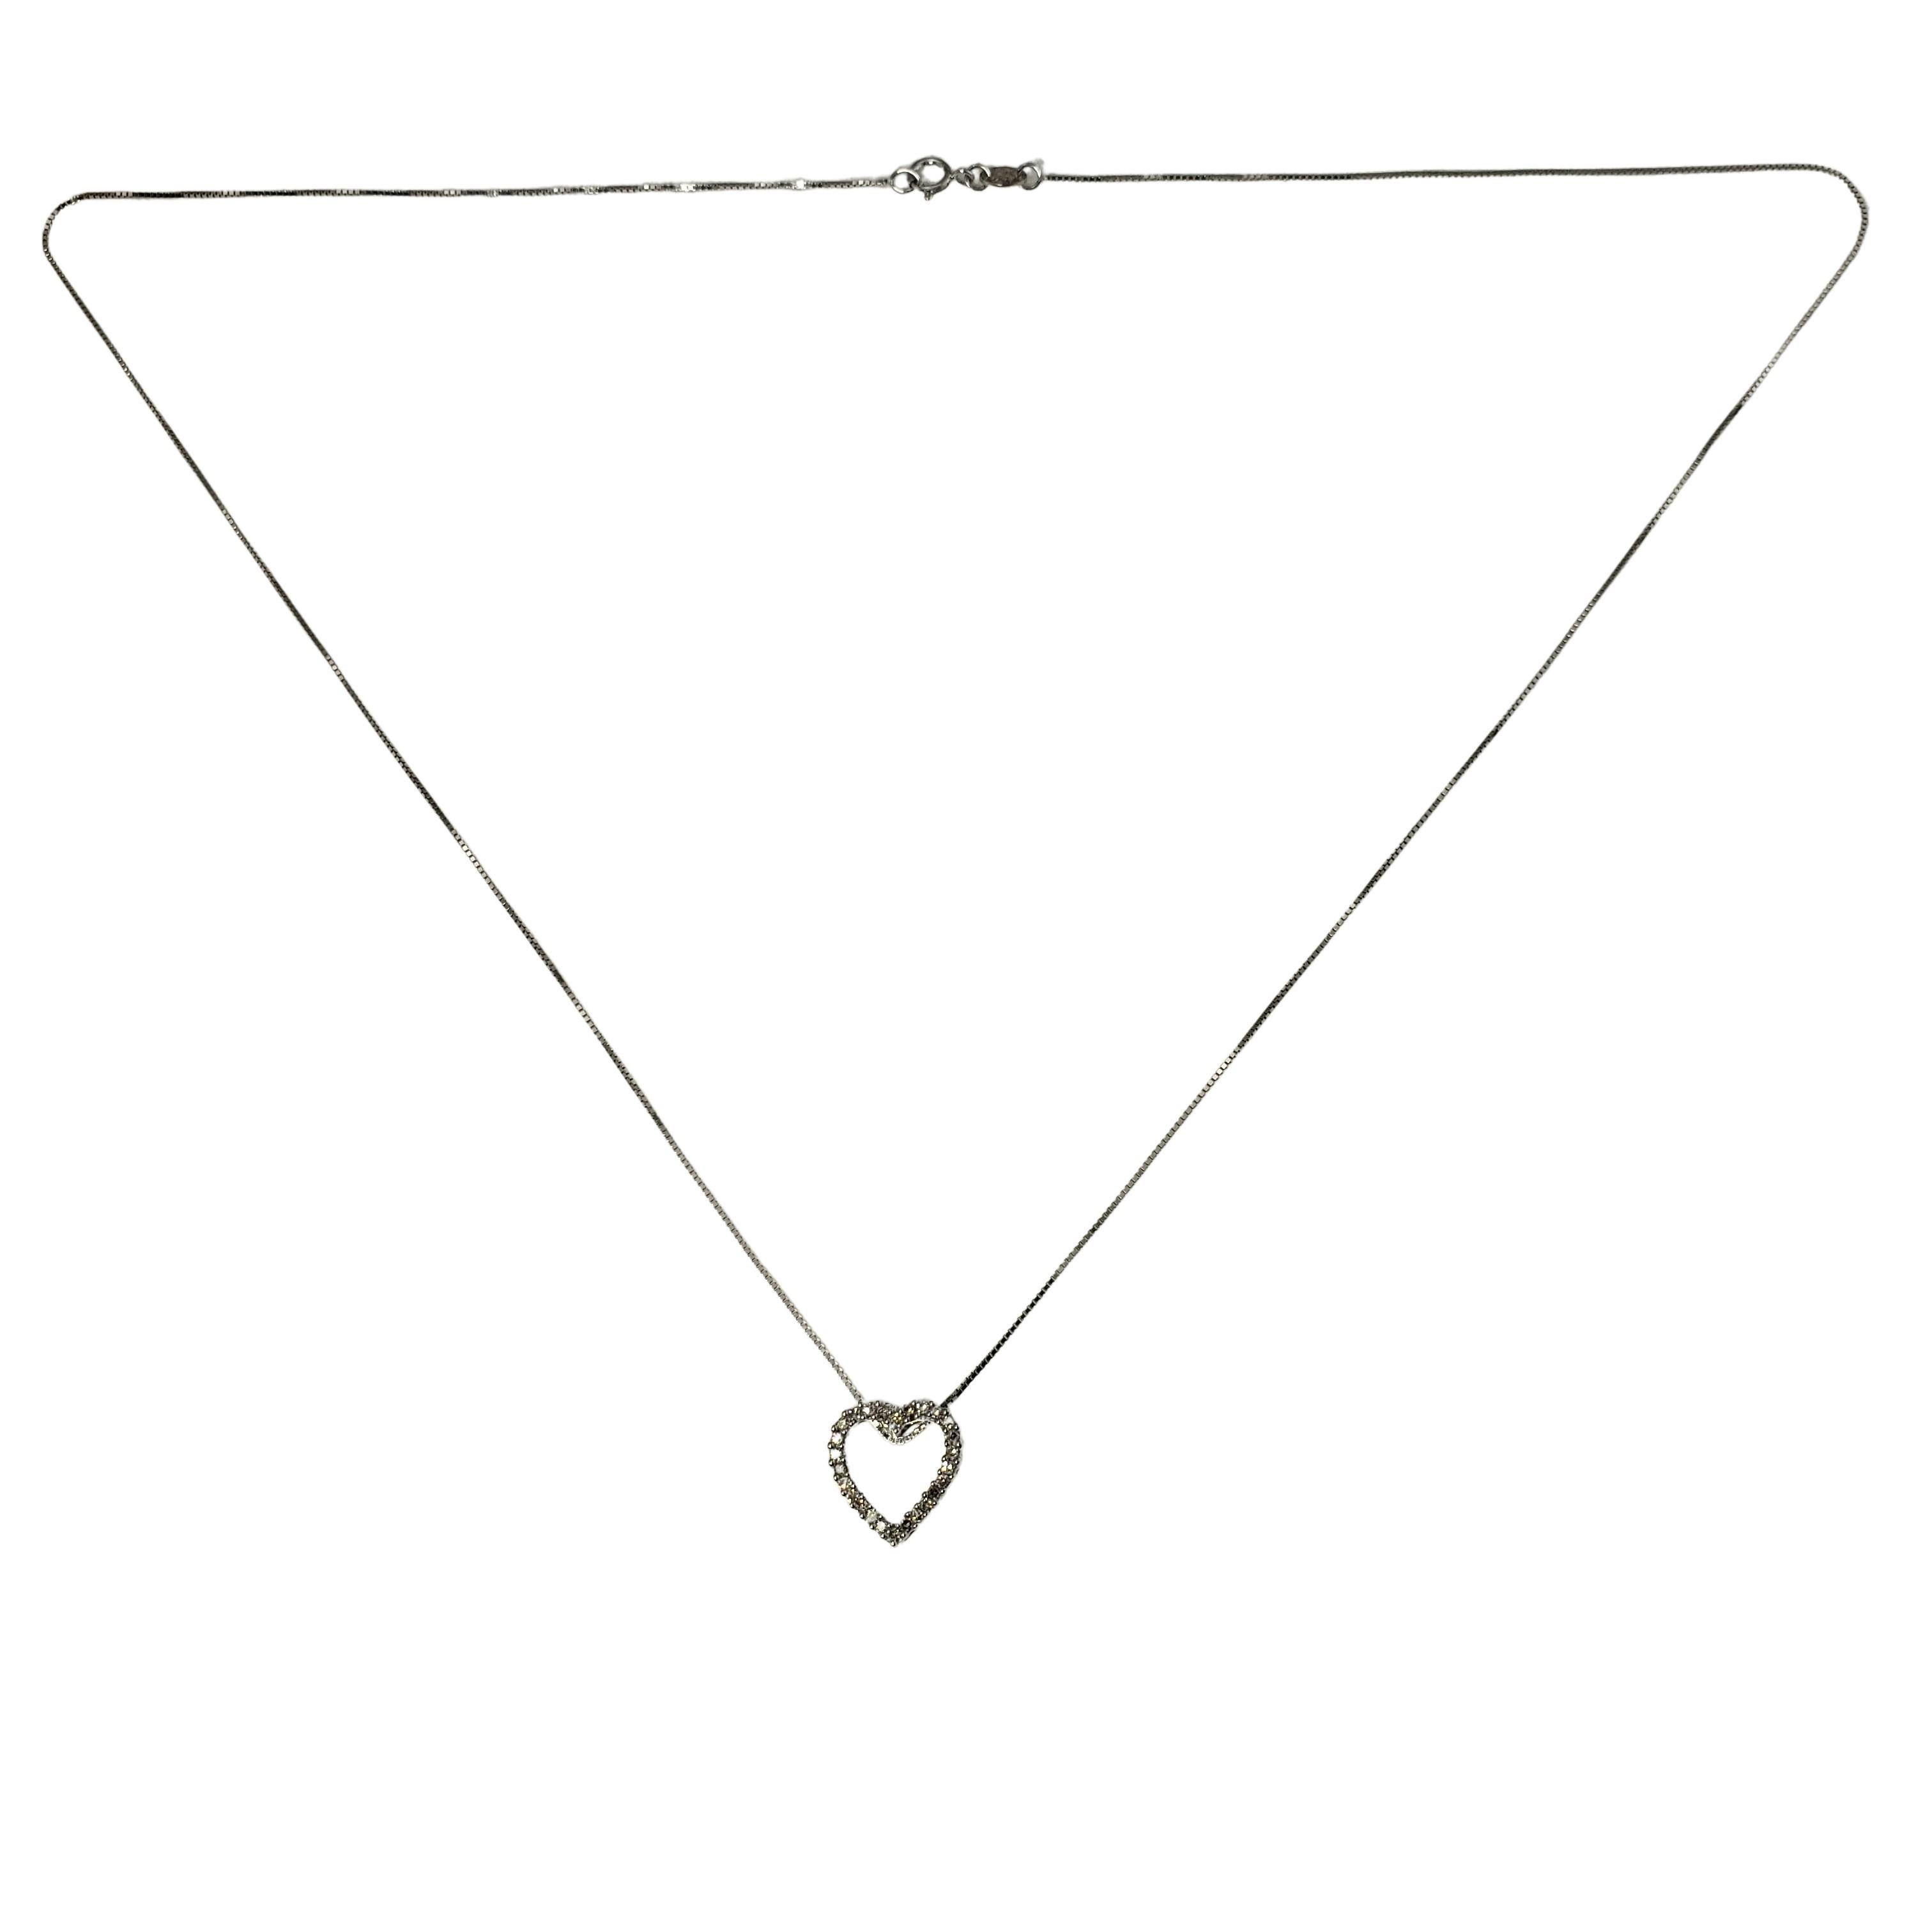 Vintage 14 Karat White Gold Diamond Heart Pendant Necklace-

This sparkling heart pendant features 26 round brilliant cut diamonds set in 14K white gold. Suspends from a classic box chain.

Approximate total diamond weight: .13 ct.

Diamond clarity: